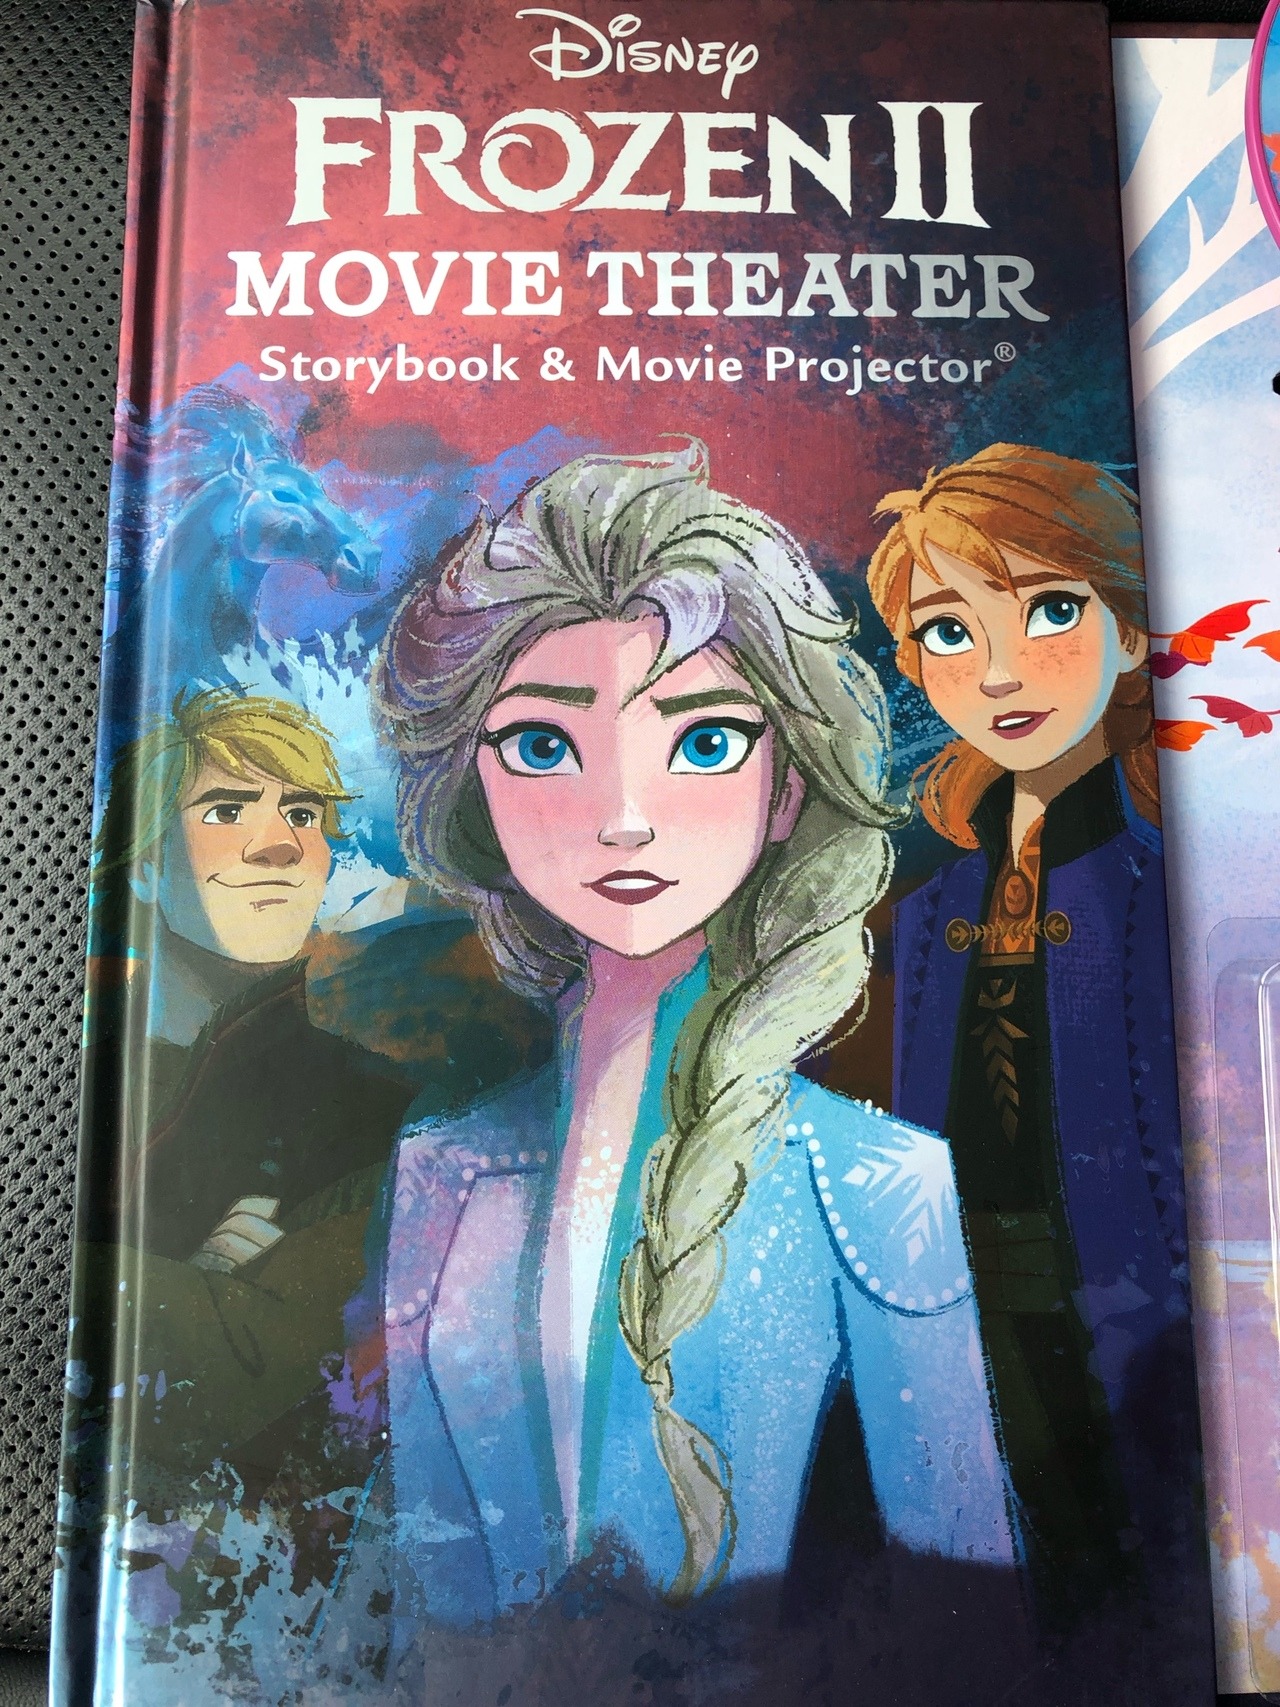 Frozen 2 Movie Theatre Storybook Spoilers By Blueappleheart89 On